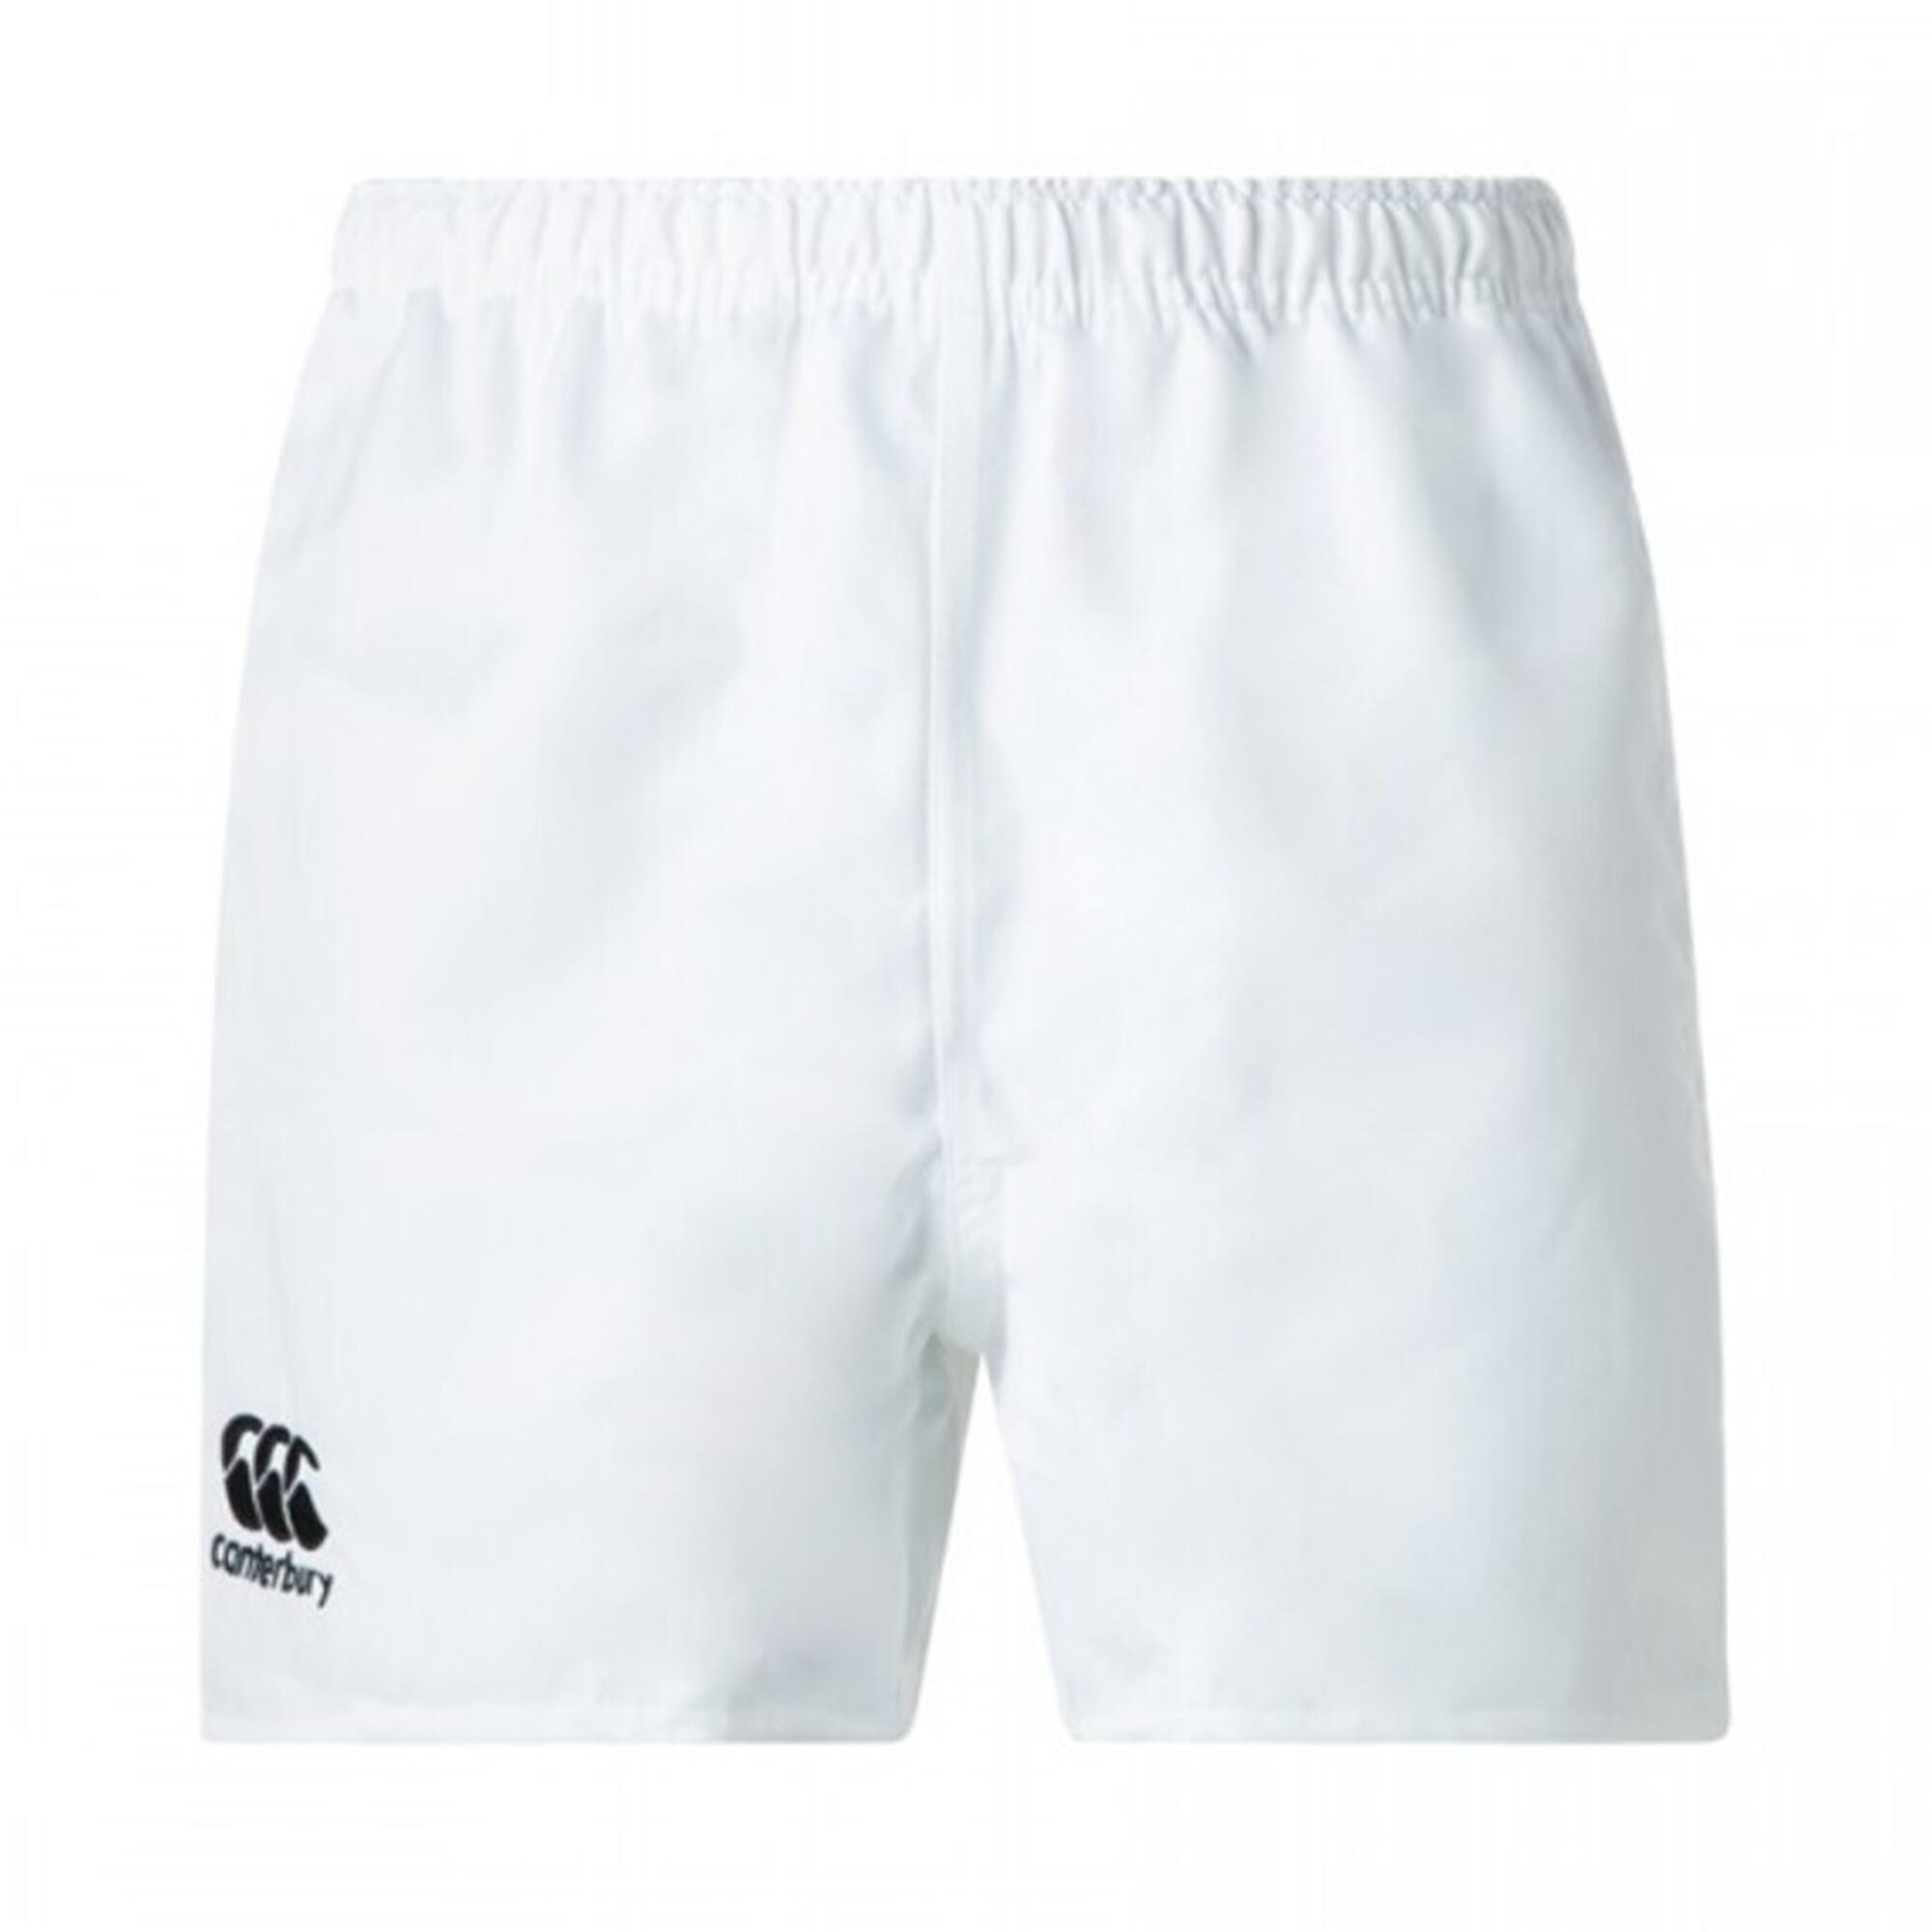 CANTERBURY Childrens/Kids Professional Polyester Shorts (White)